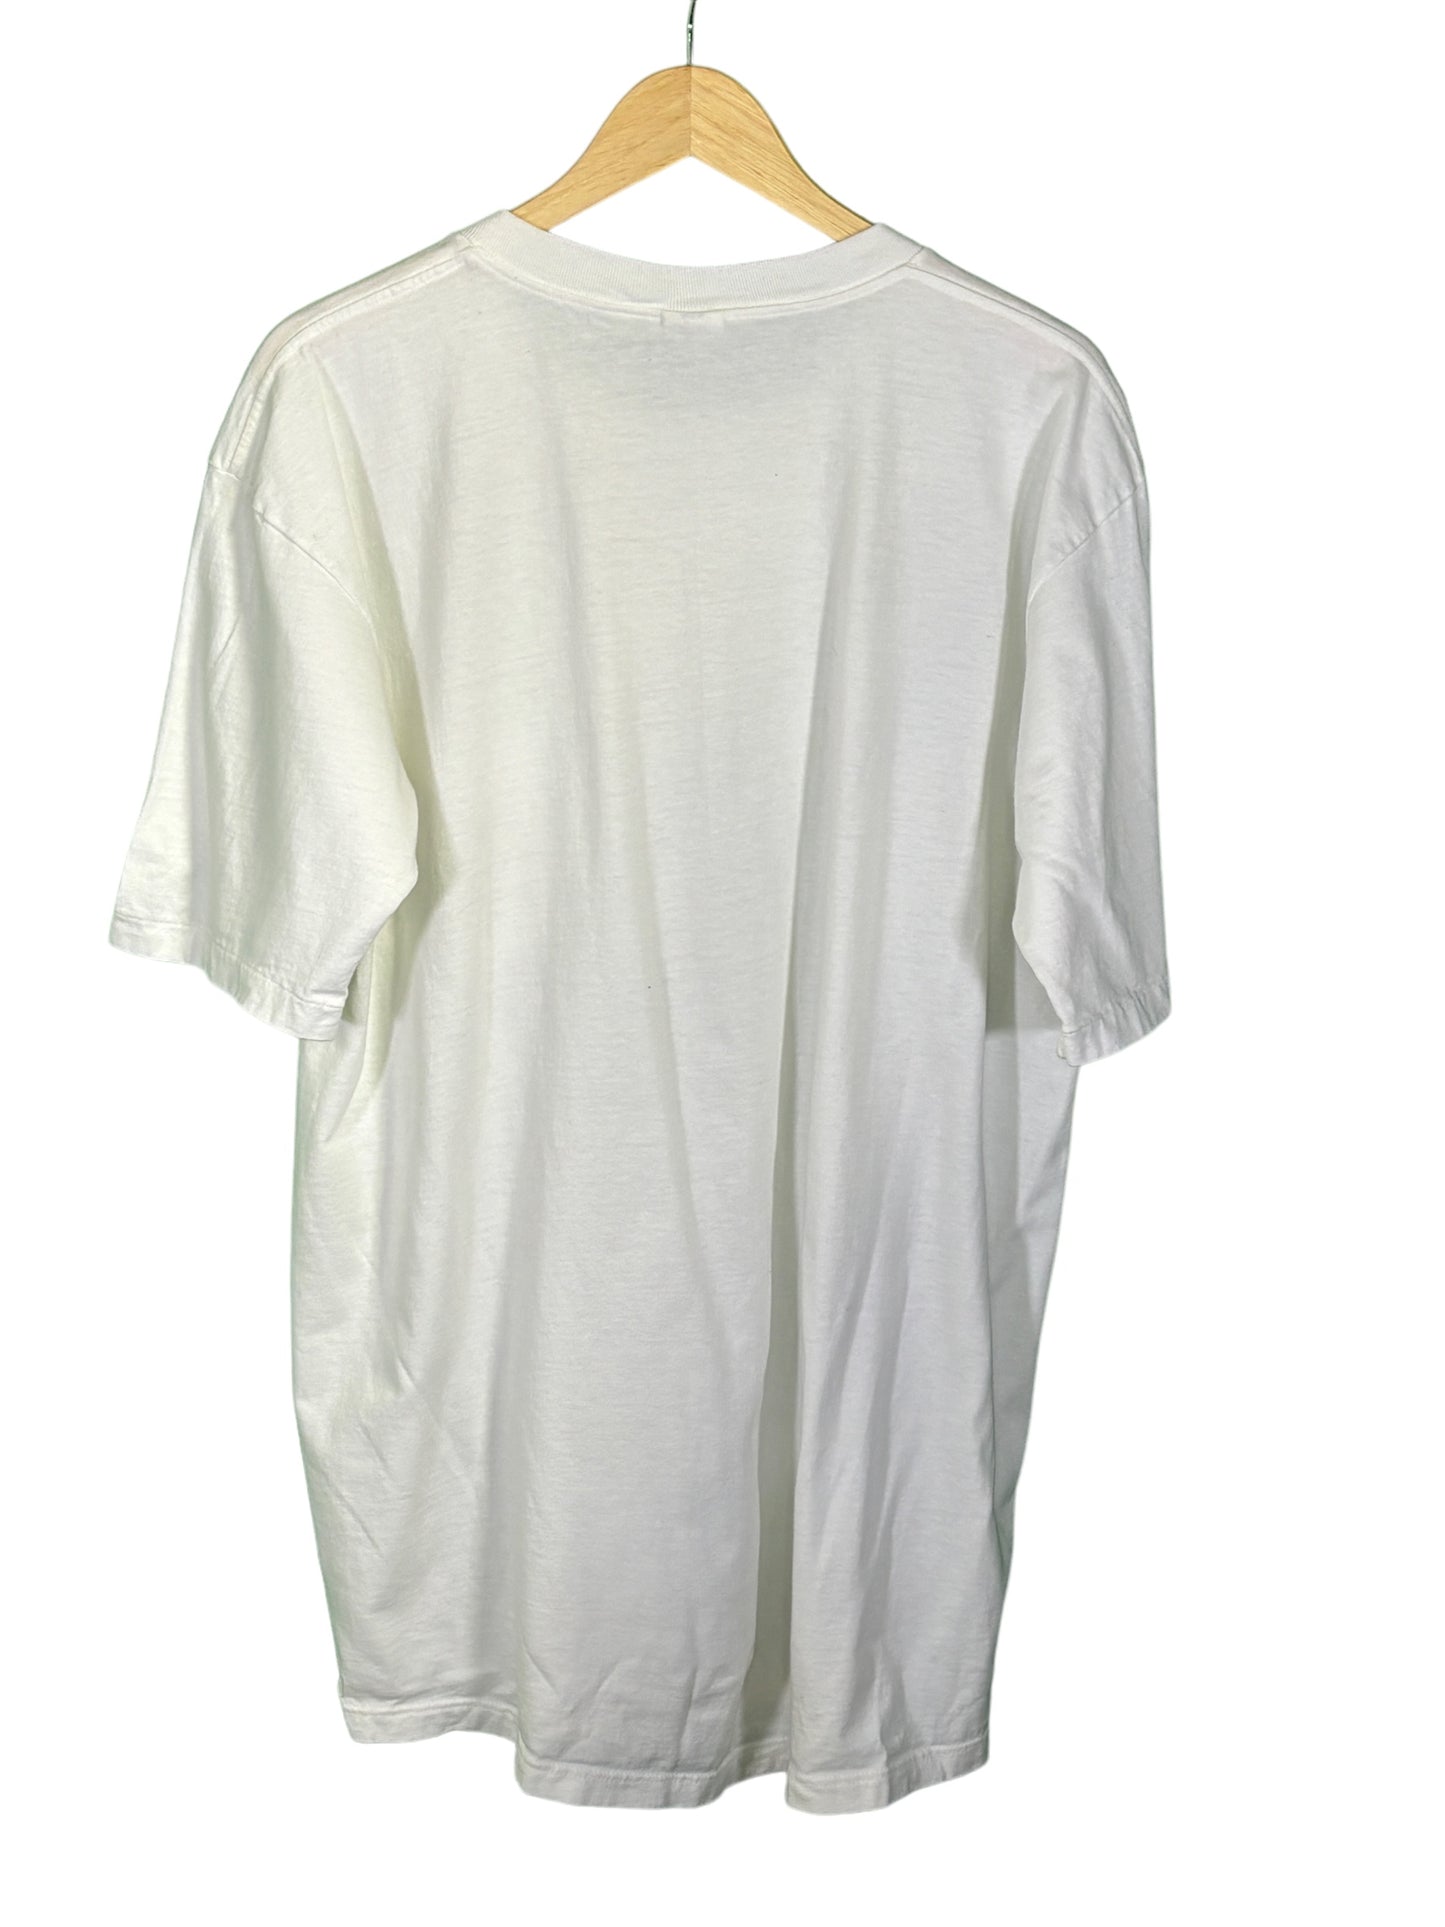 Vintage 90's Towncraft JCPenny Blank White Pocket Tee Size Large